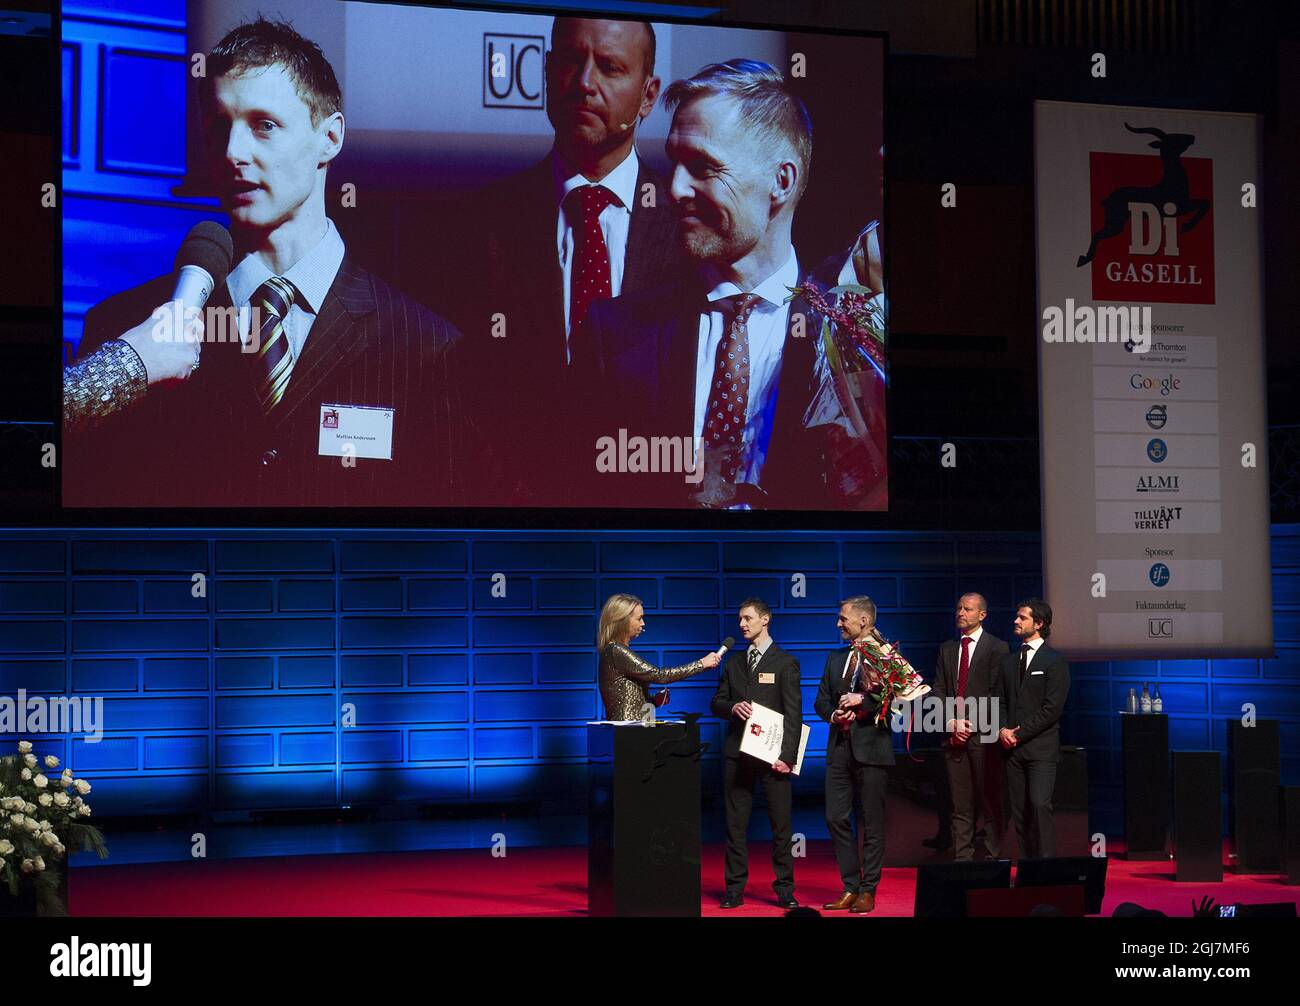 STOCKHOLM 2012-12-03  Proactive Gaming Scandinavia founder Mattias Andersson (2nd L) and MD Pal Burman (3rd L) recieves tha Gasell award from financial paper Dagens Industri managing editor Lotta Edling (L), Editor in Chief Peter Fellman (2nd R) and Prince Carl Philip (R) during the Gasell gala award ceremony at the Stockholm Concert Hall in Stockholm, Sweden, December 3, 2012.  Photo: Maja Suslin / SCANPIX / Kod 10300   Stock Photo